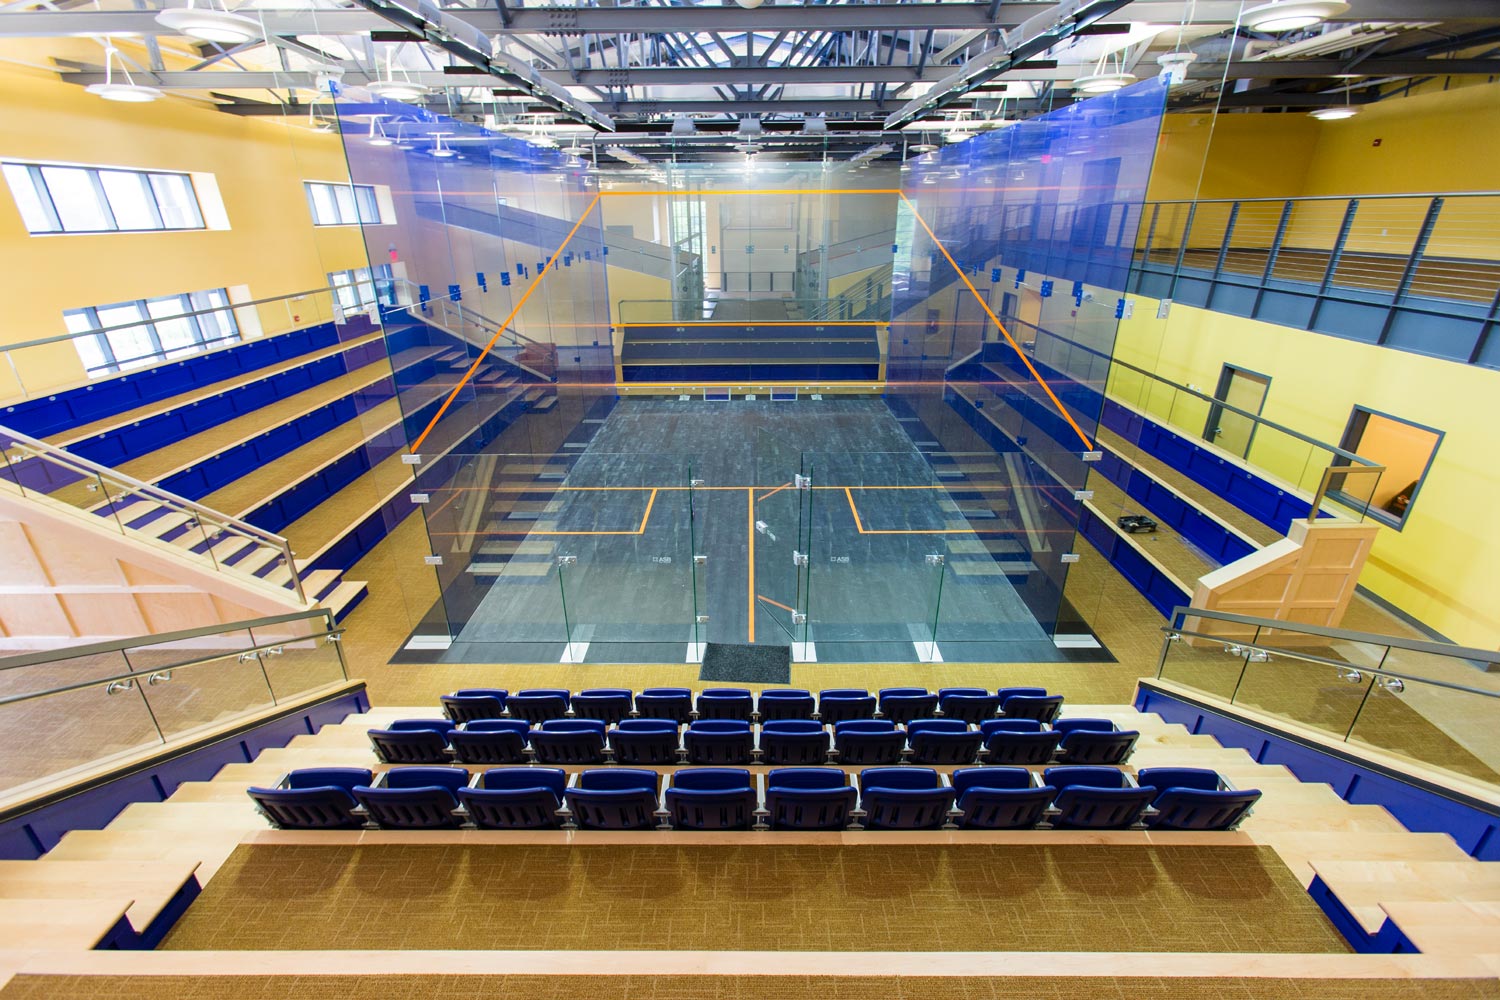 The McArthur Squash Court surrounded by chairs